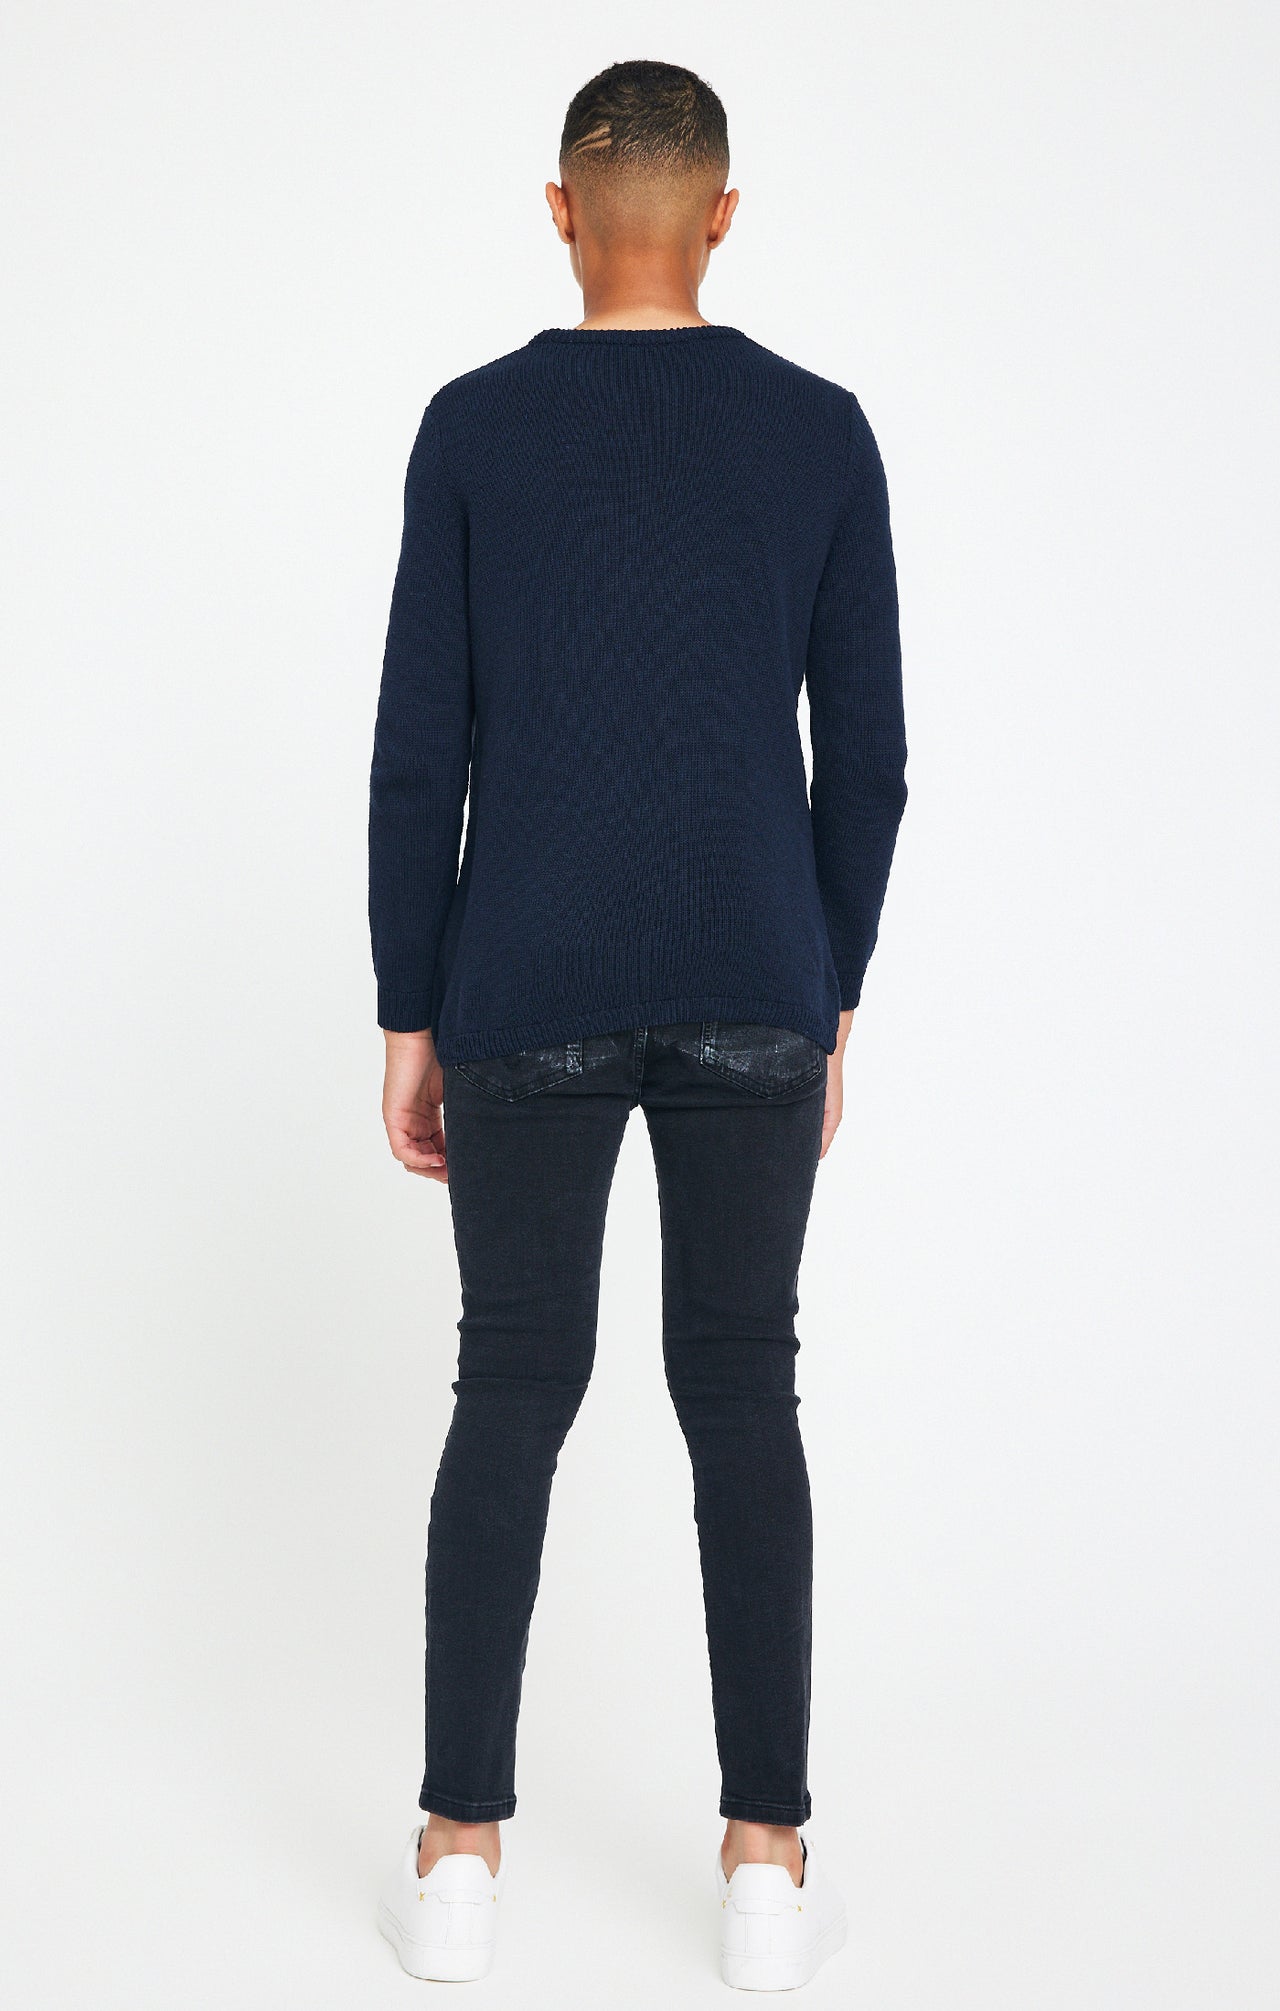 Boys Messi x SikSilk Navy Knitted Jumper (5)